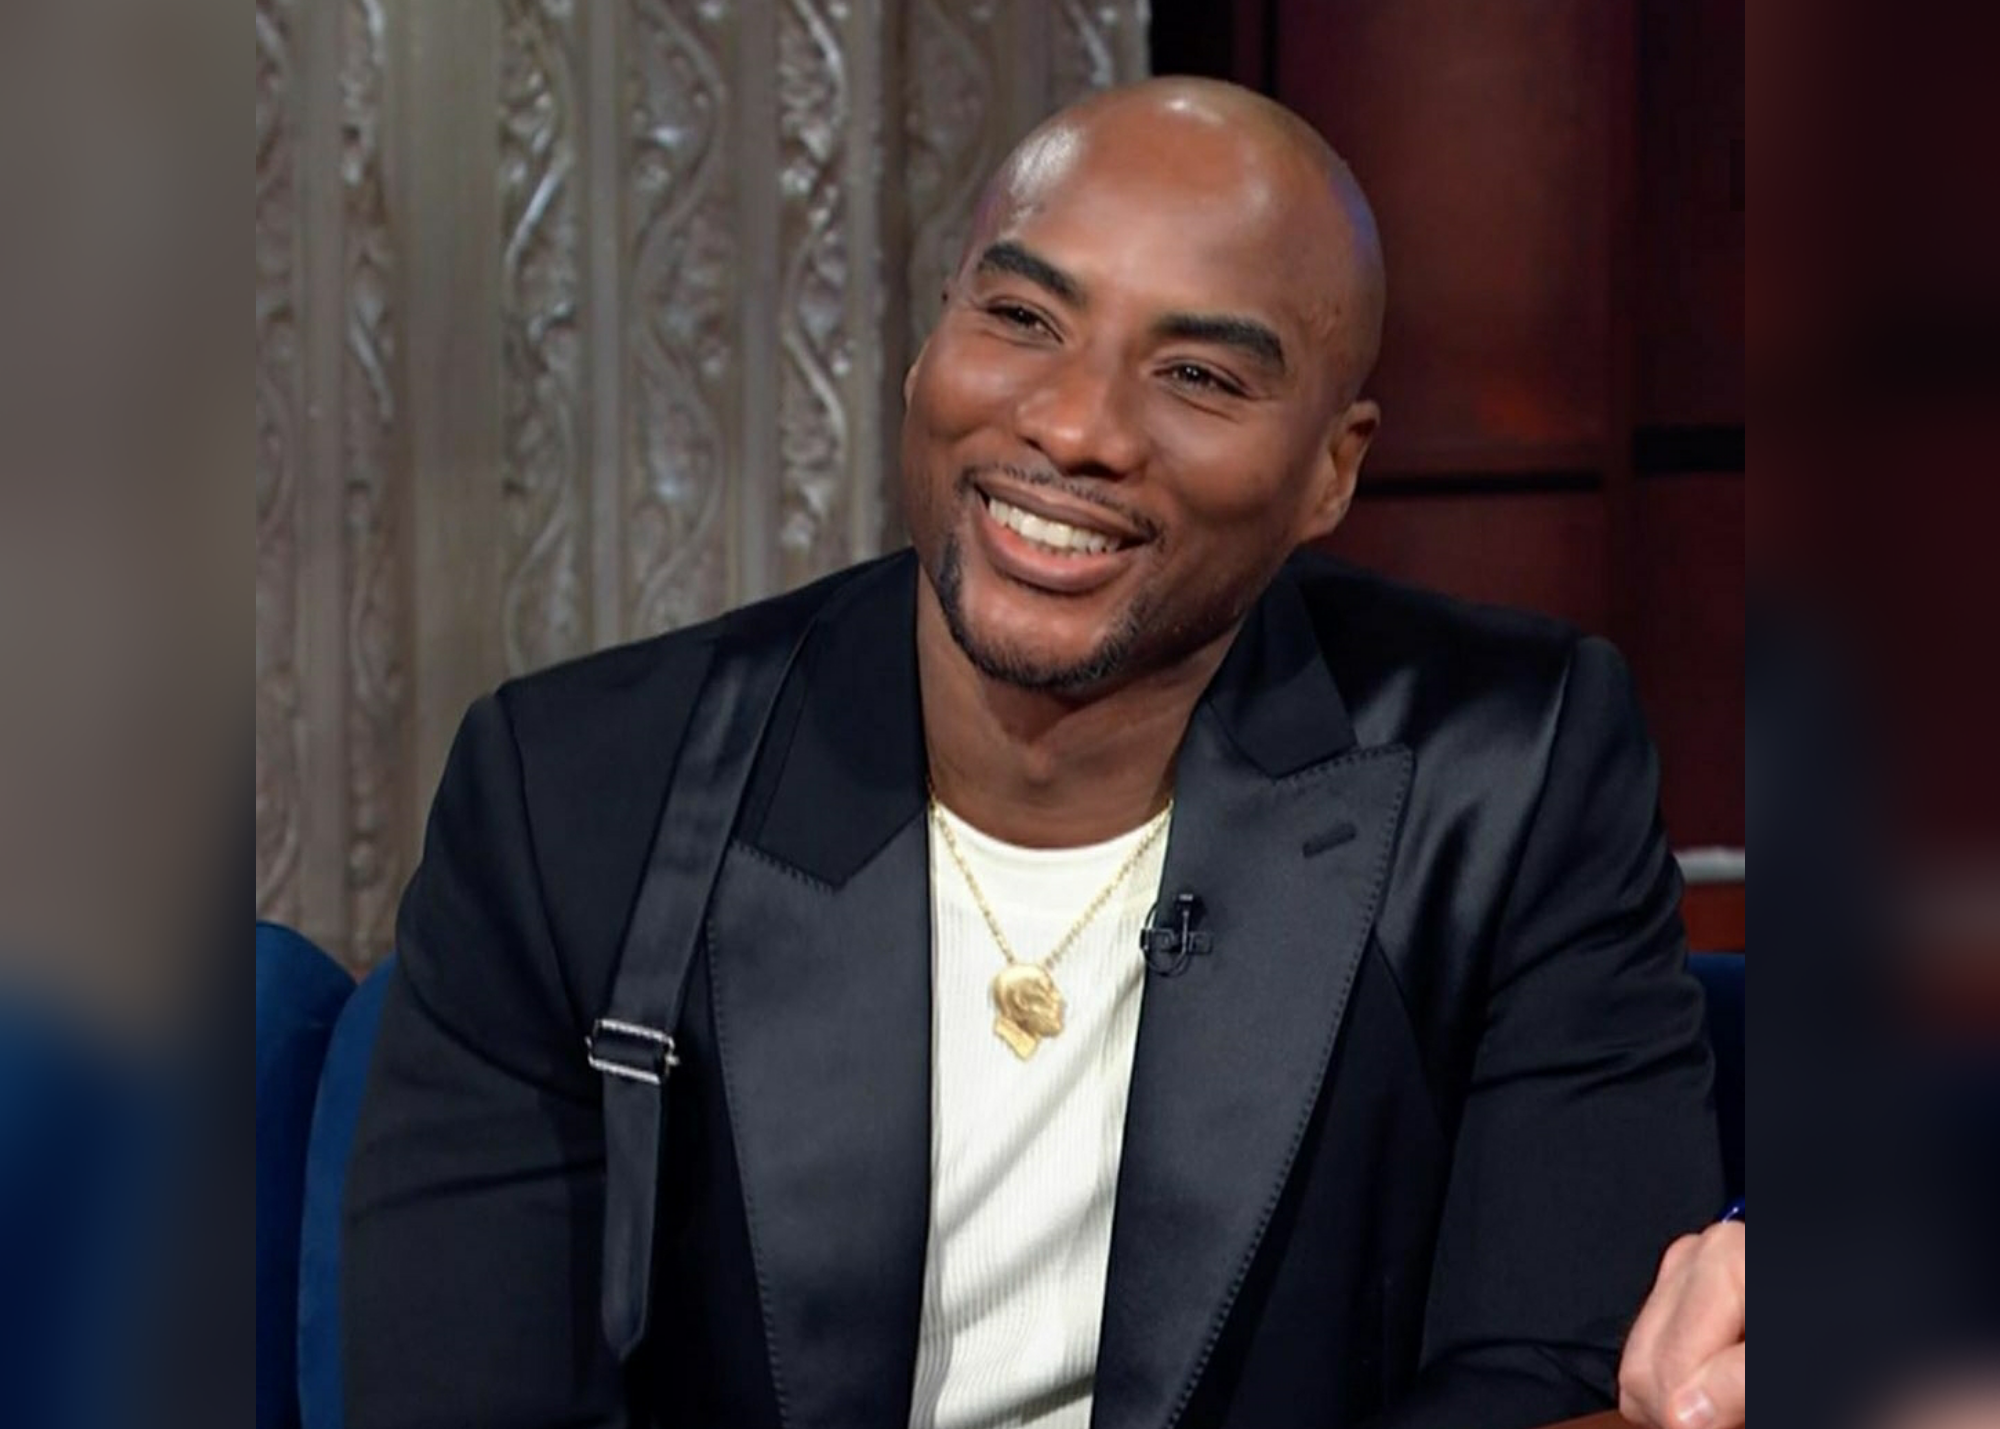 Charlamagne Tha God To Host Weekly Talk Show On Comedy Central